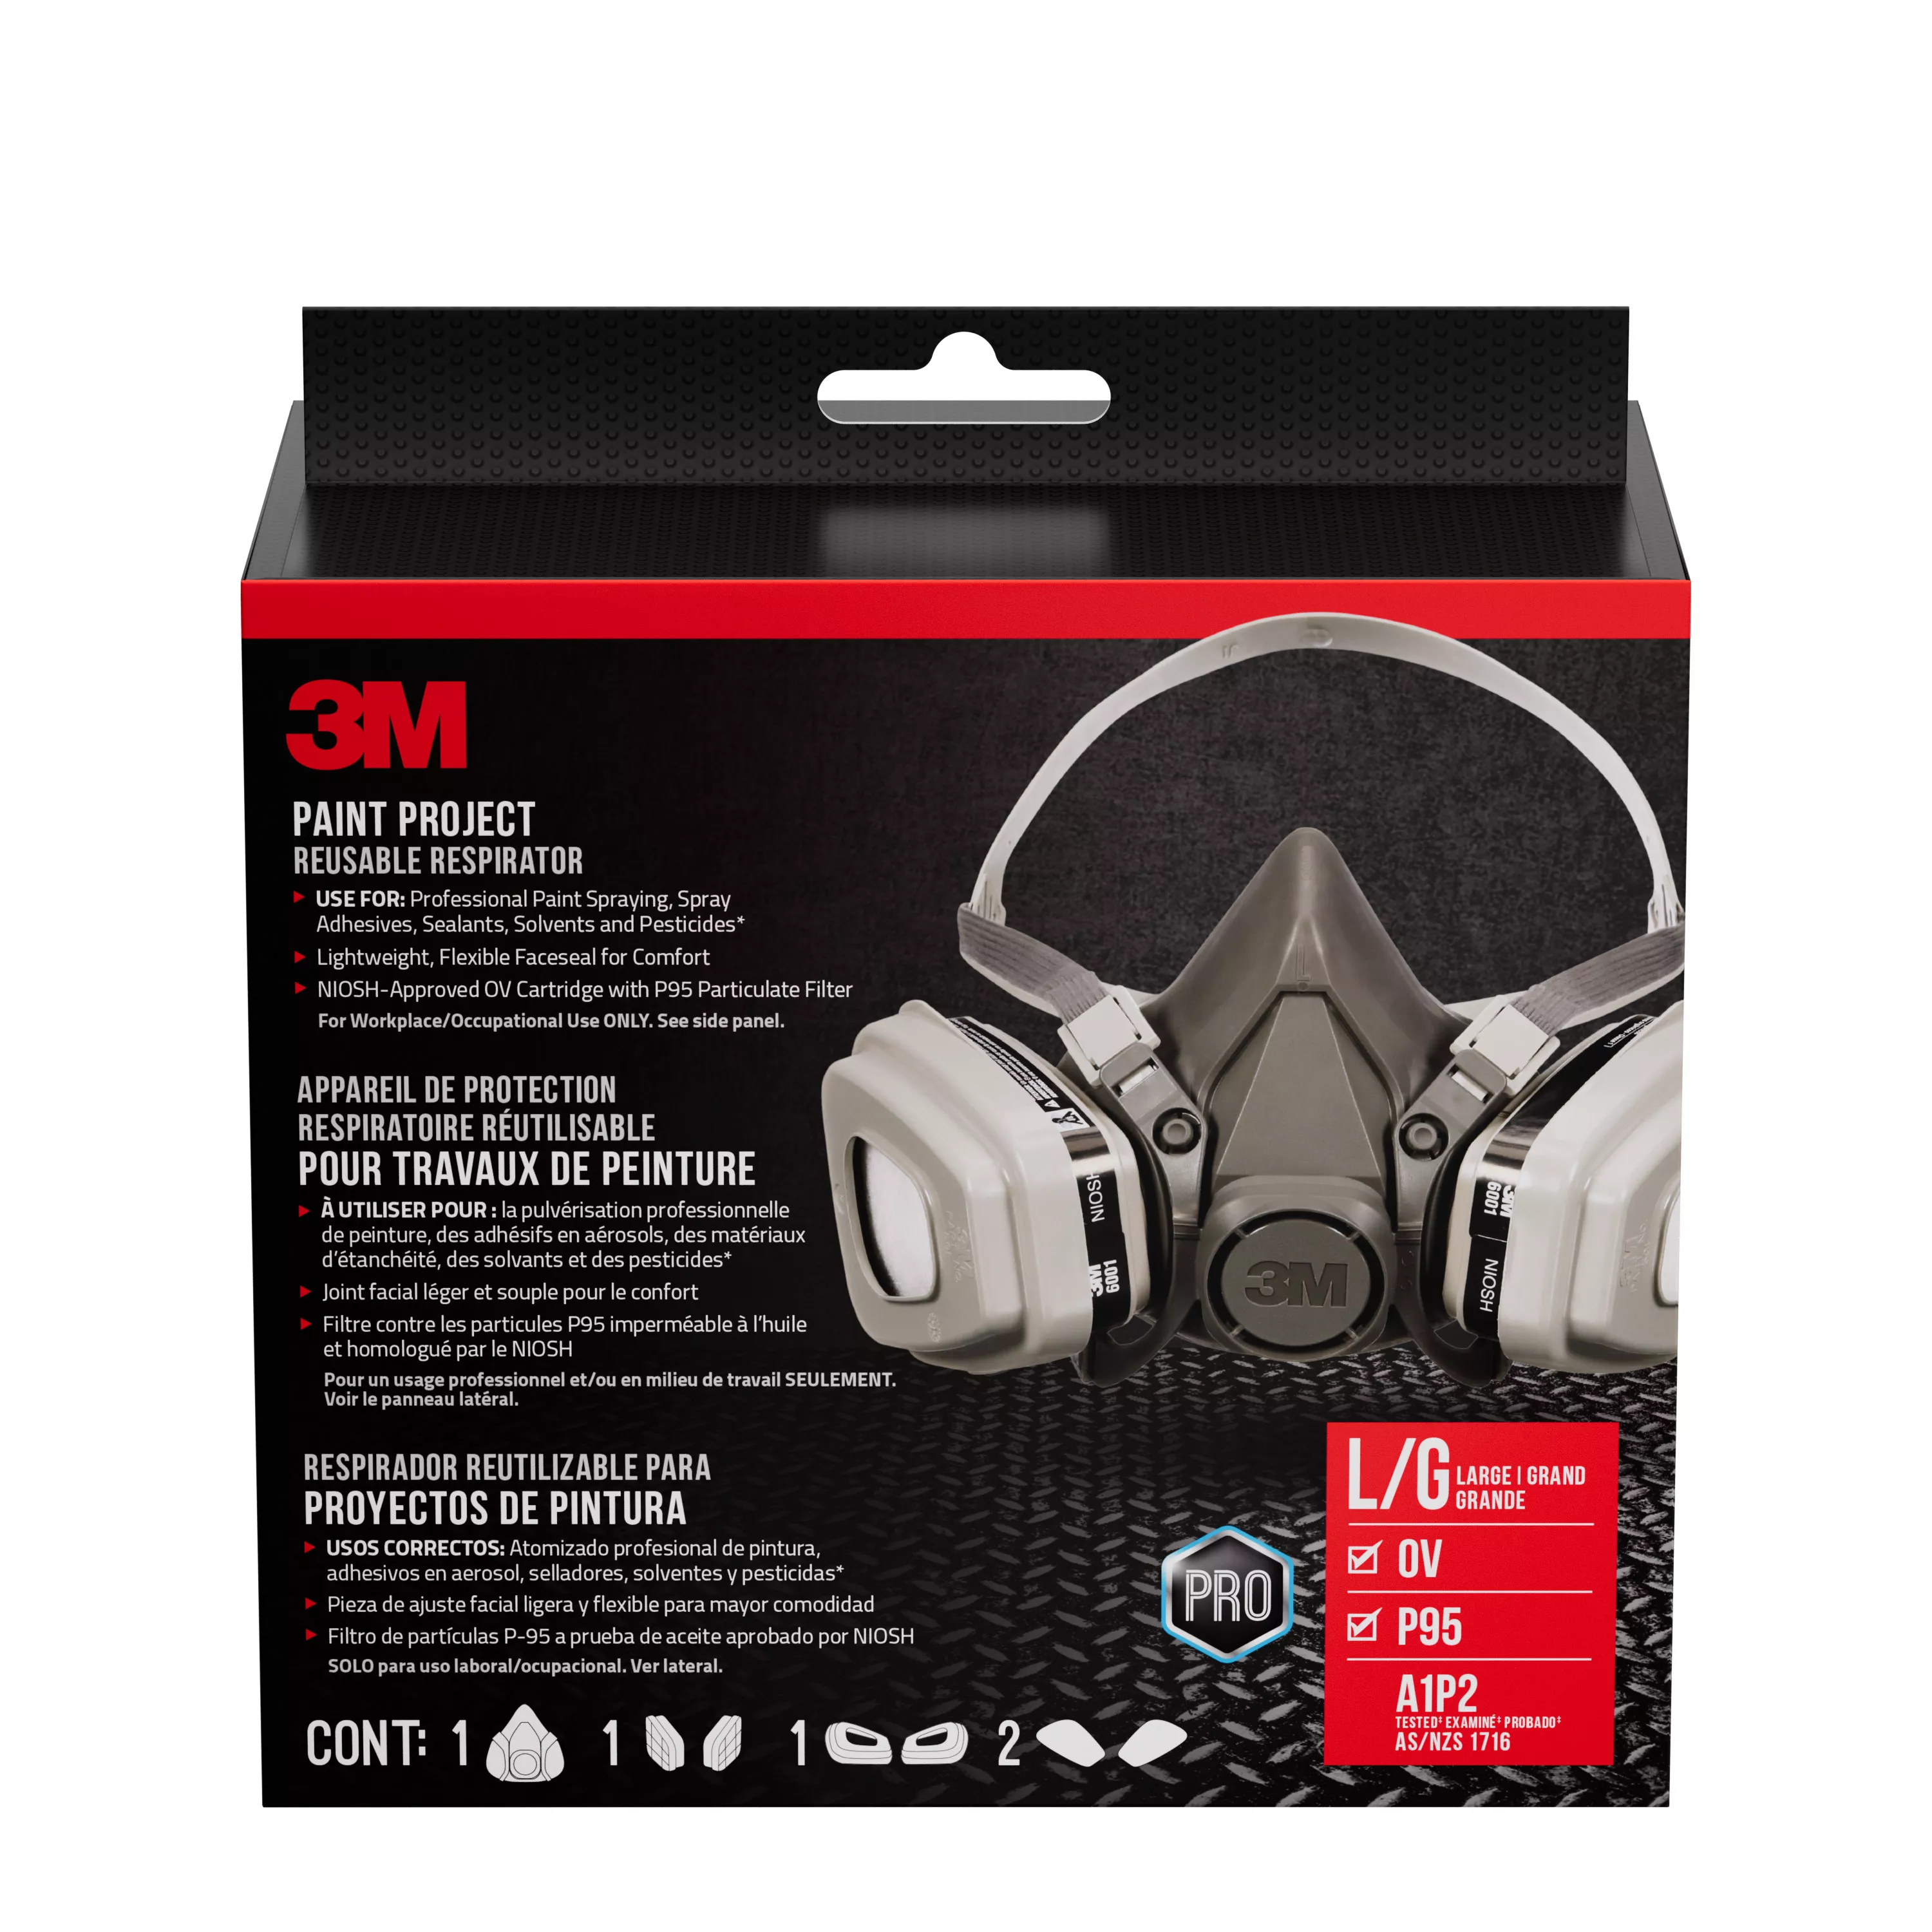 3M™ Performance Paint Project Respirator OV/P95, 6311P1-DC, Size Large,
1 each/pack, 4 packs/case